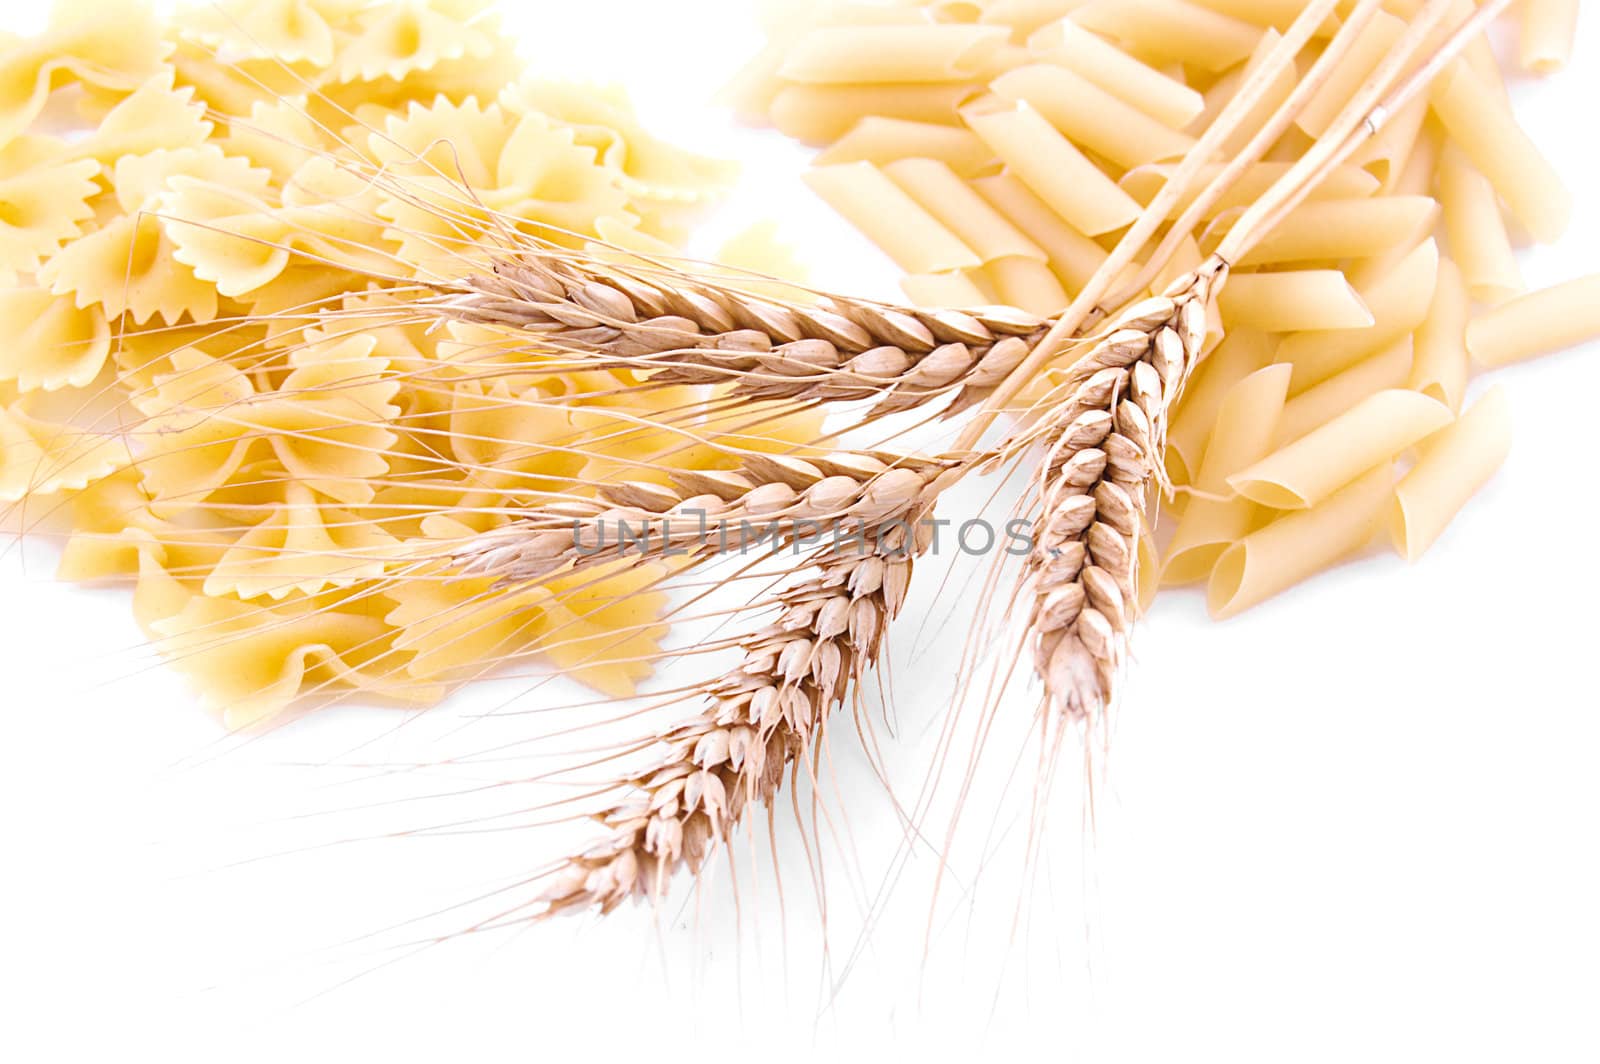 Pasta with wheat ears by Angel_a